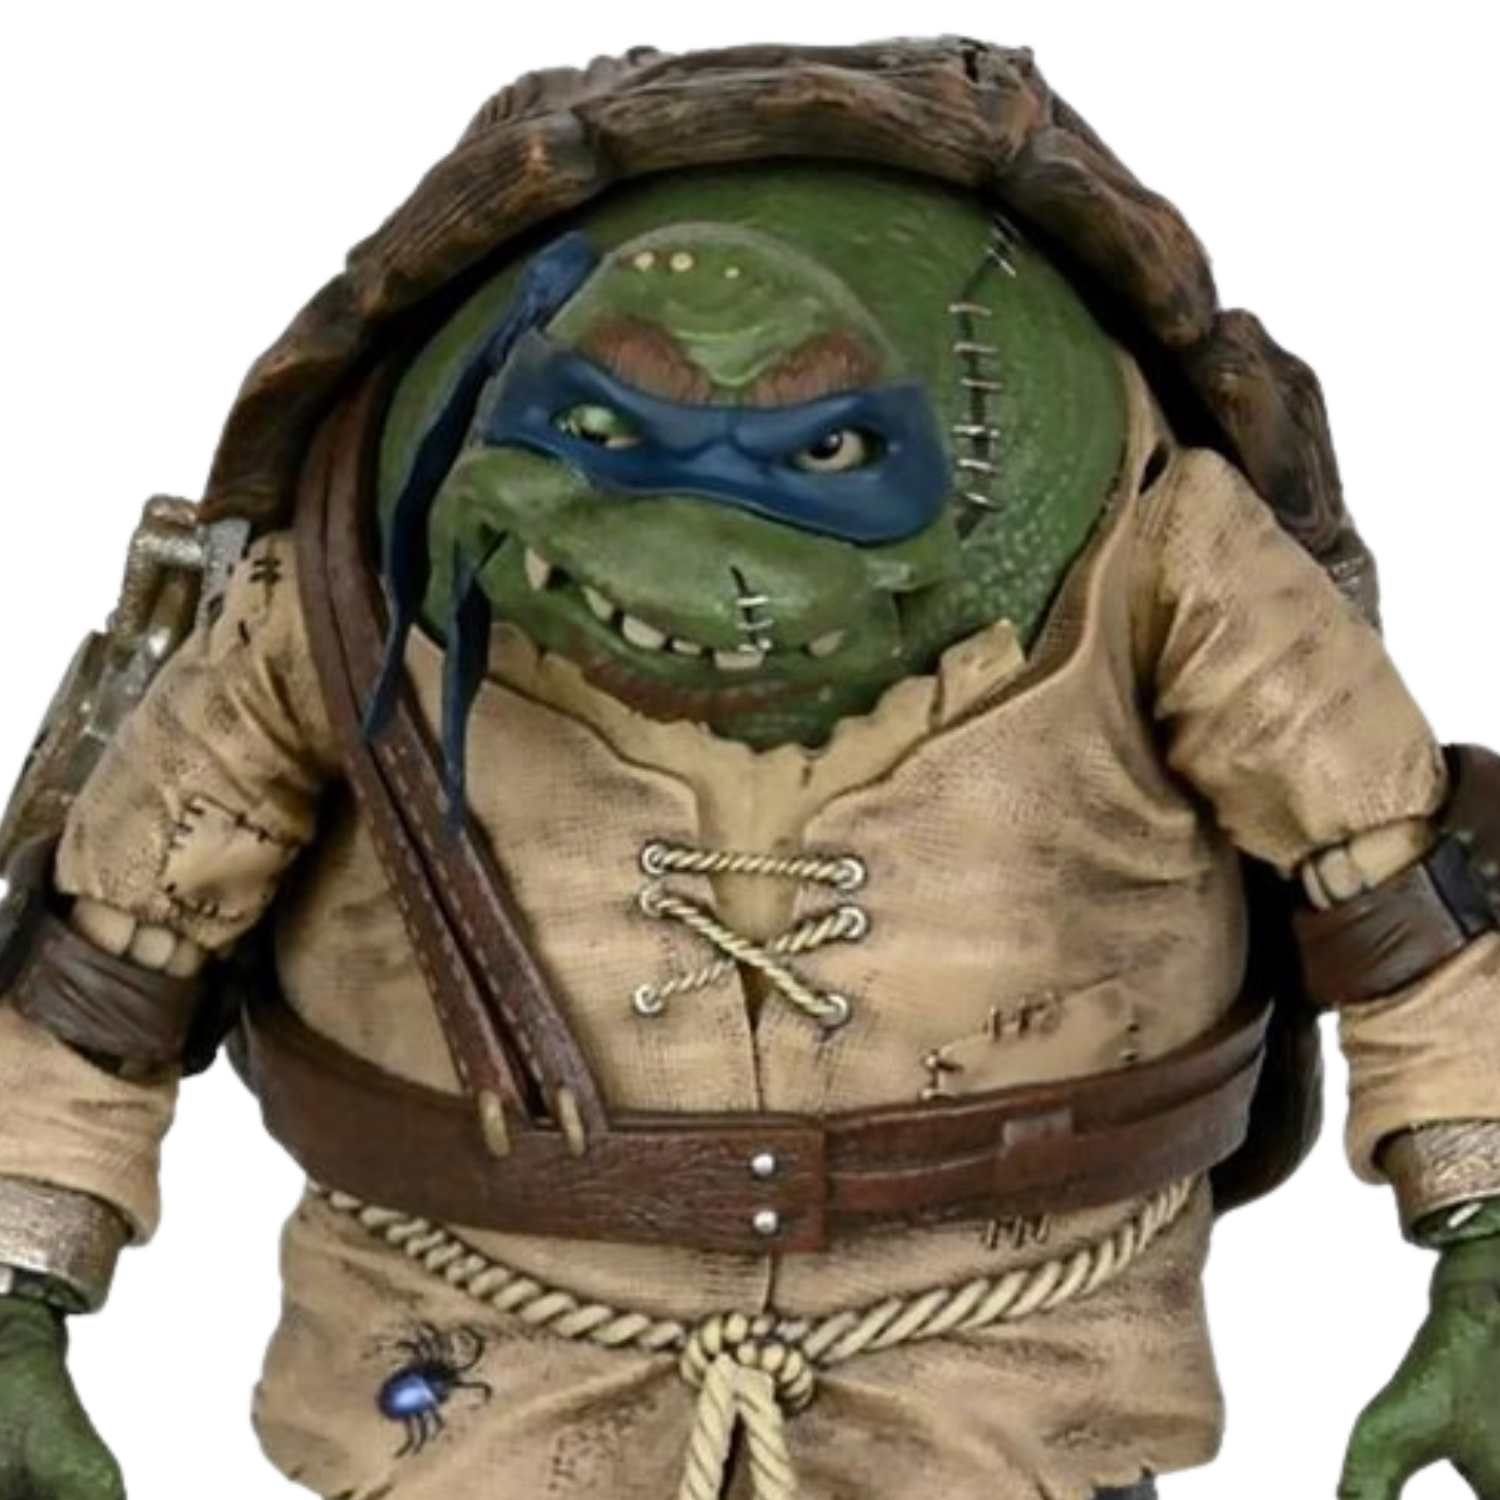 This image shows Leonardo from TMNT as the Notre Dame